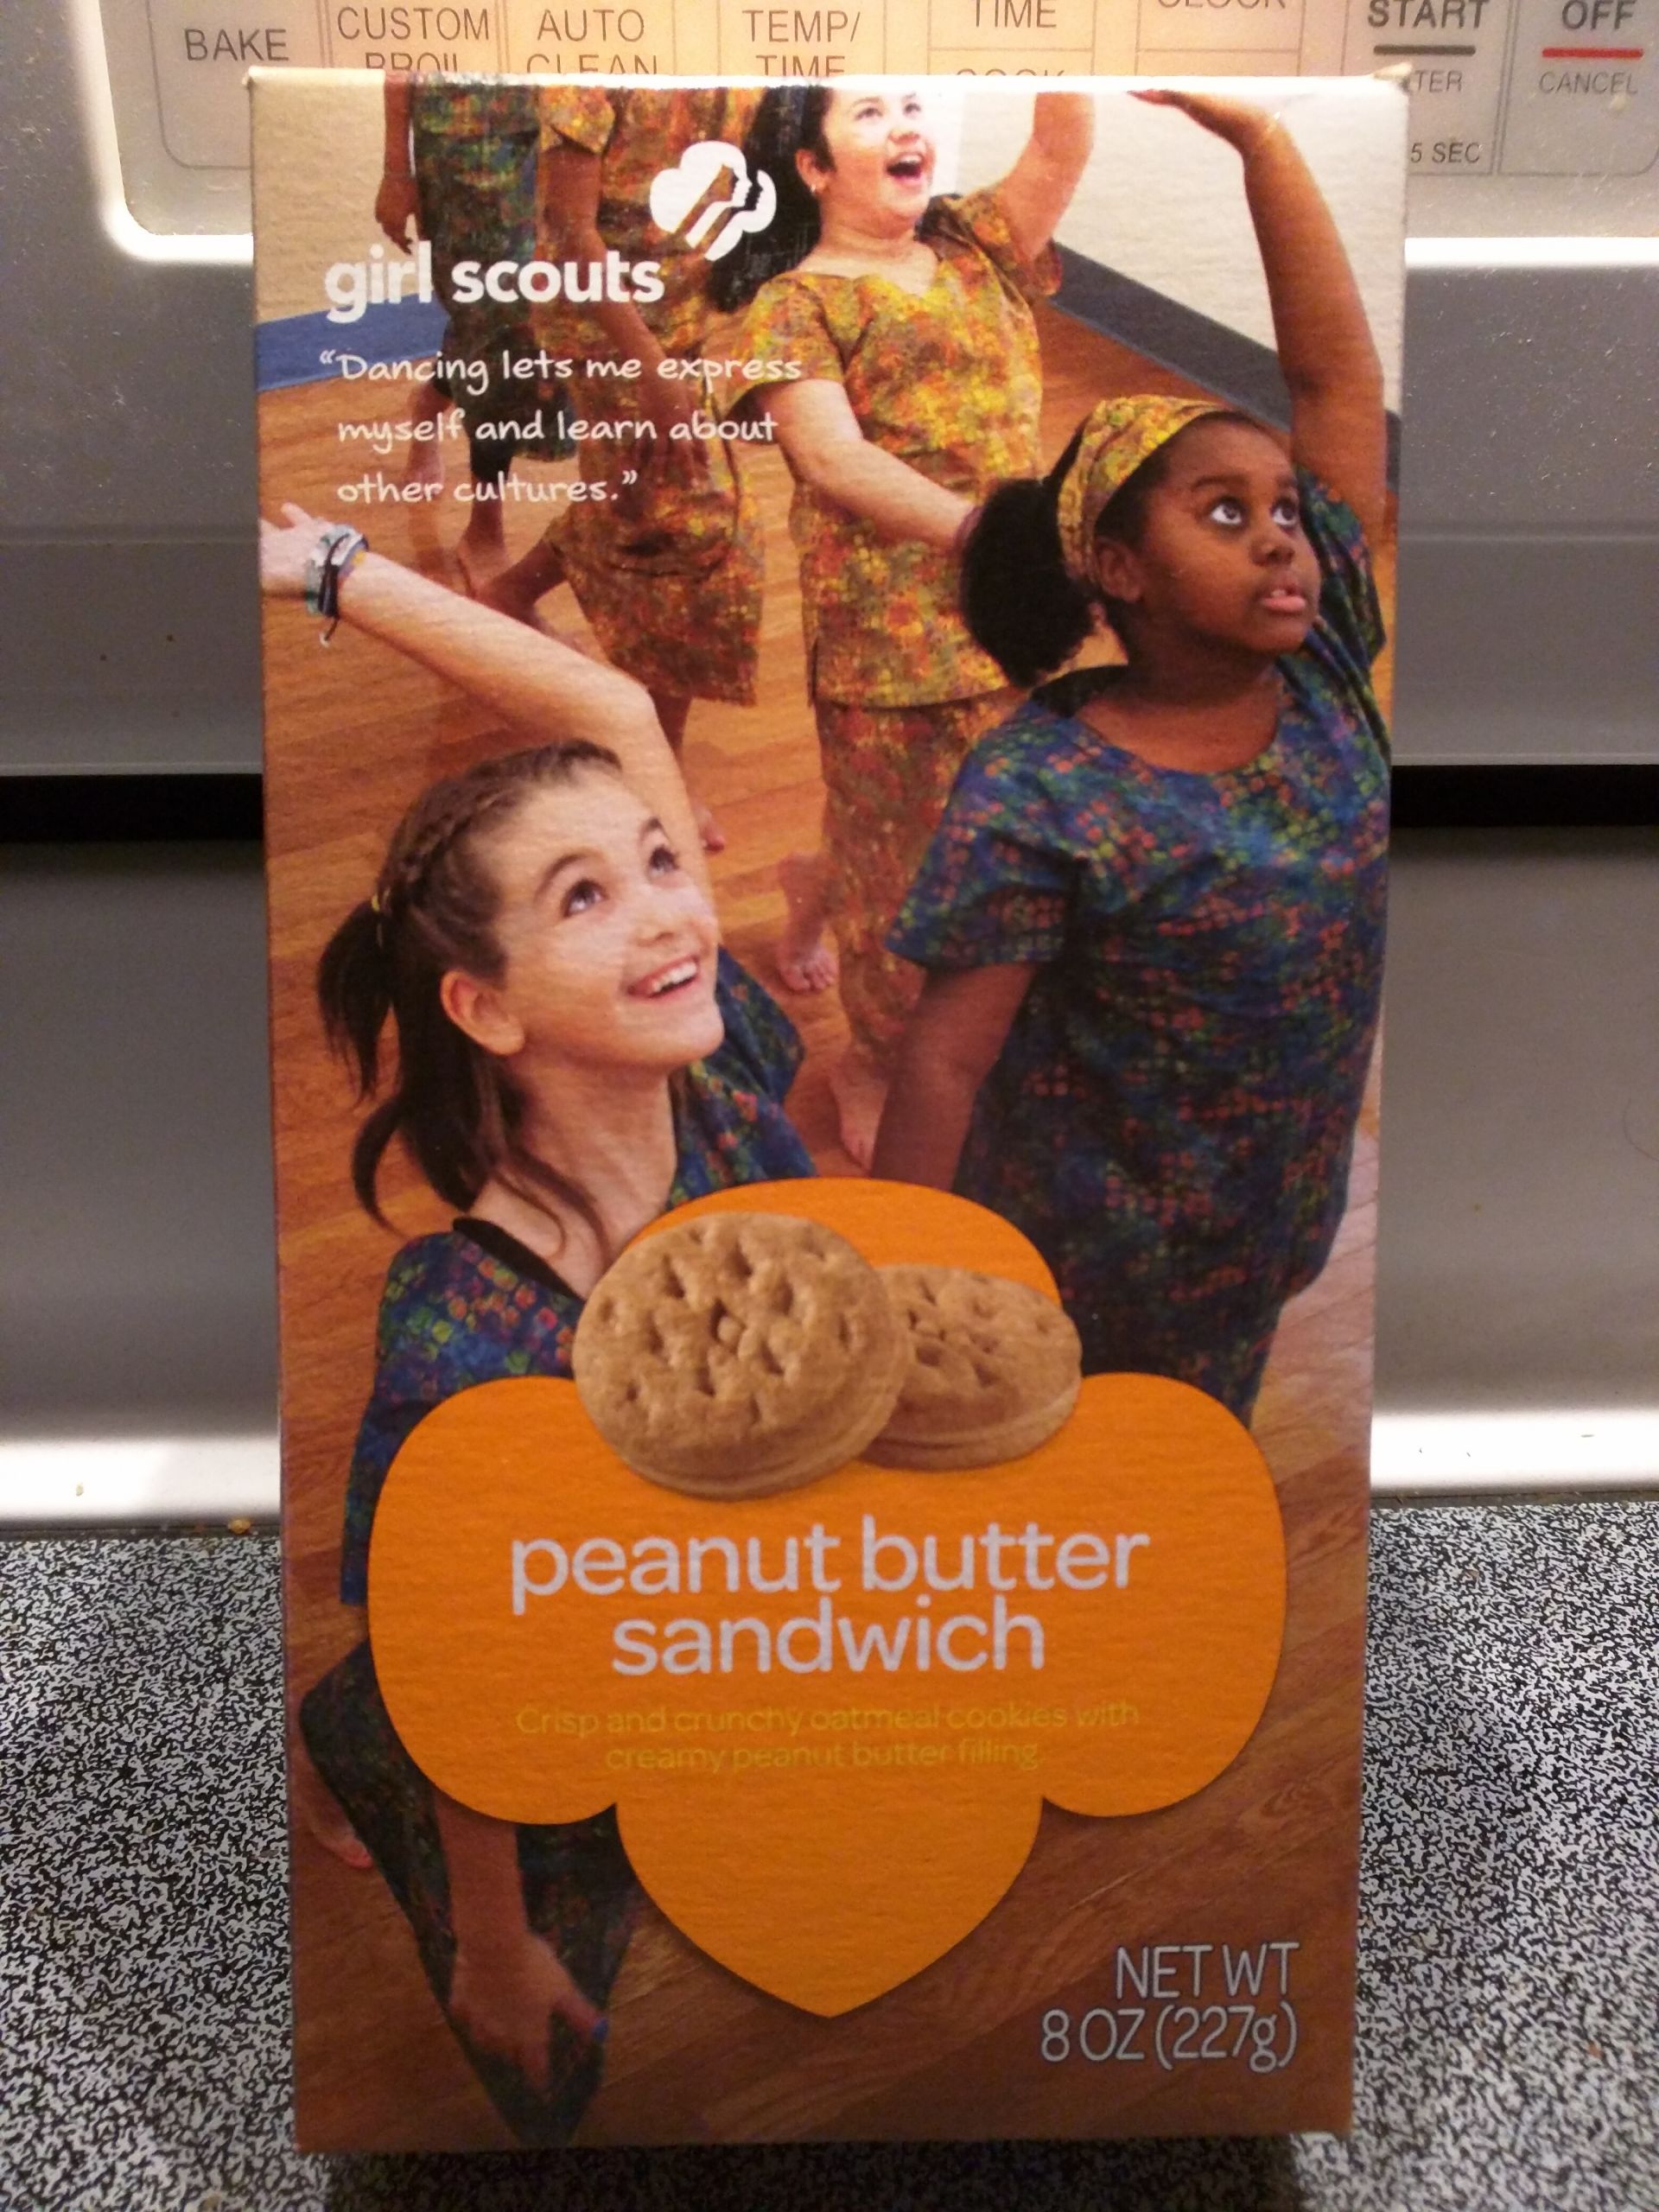 Peanut Butter Sandwich Girl Scout Cookies
 My favorite Girl Scout Cookies – Travel Finance Food